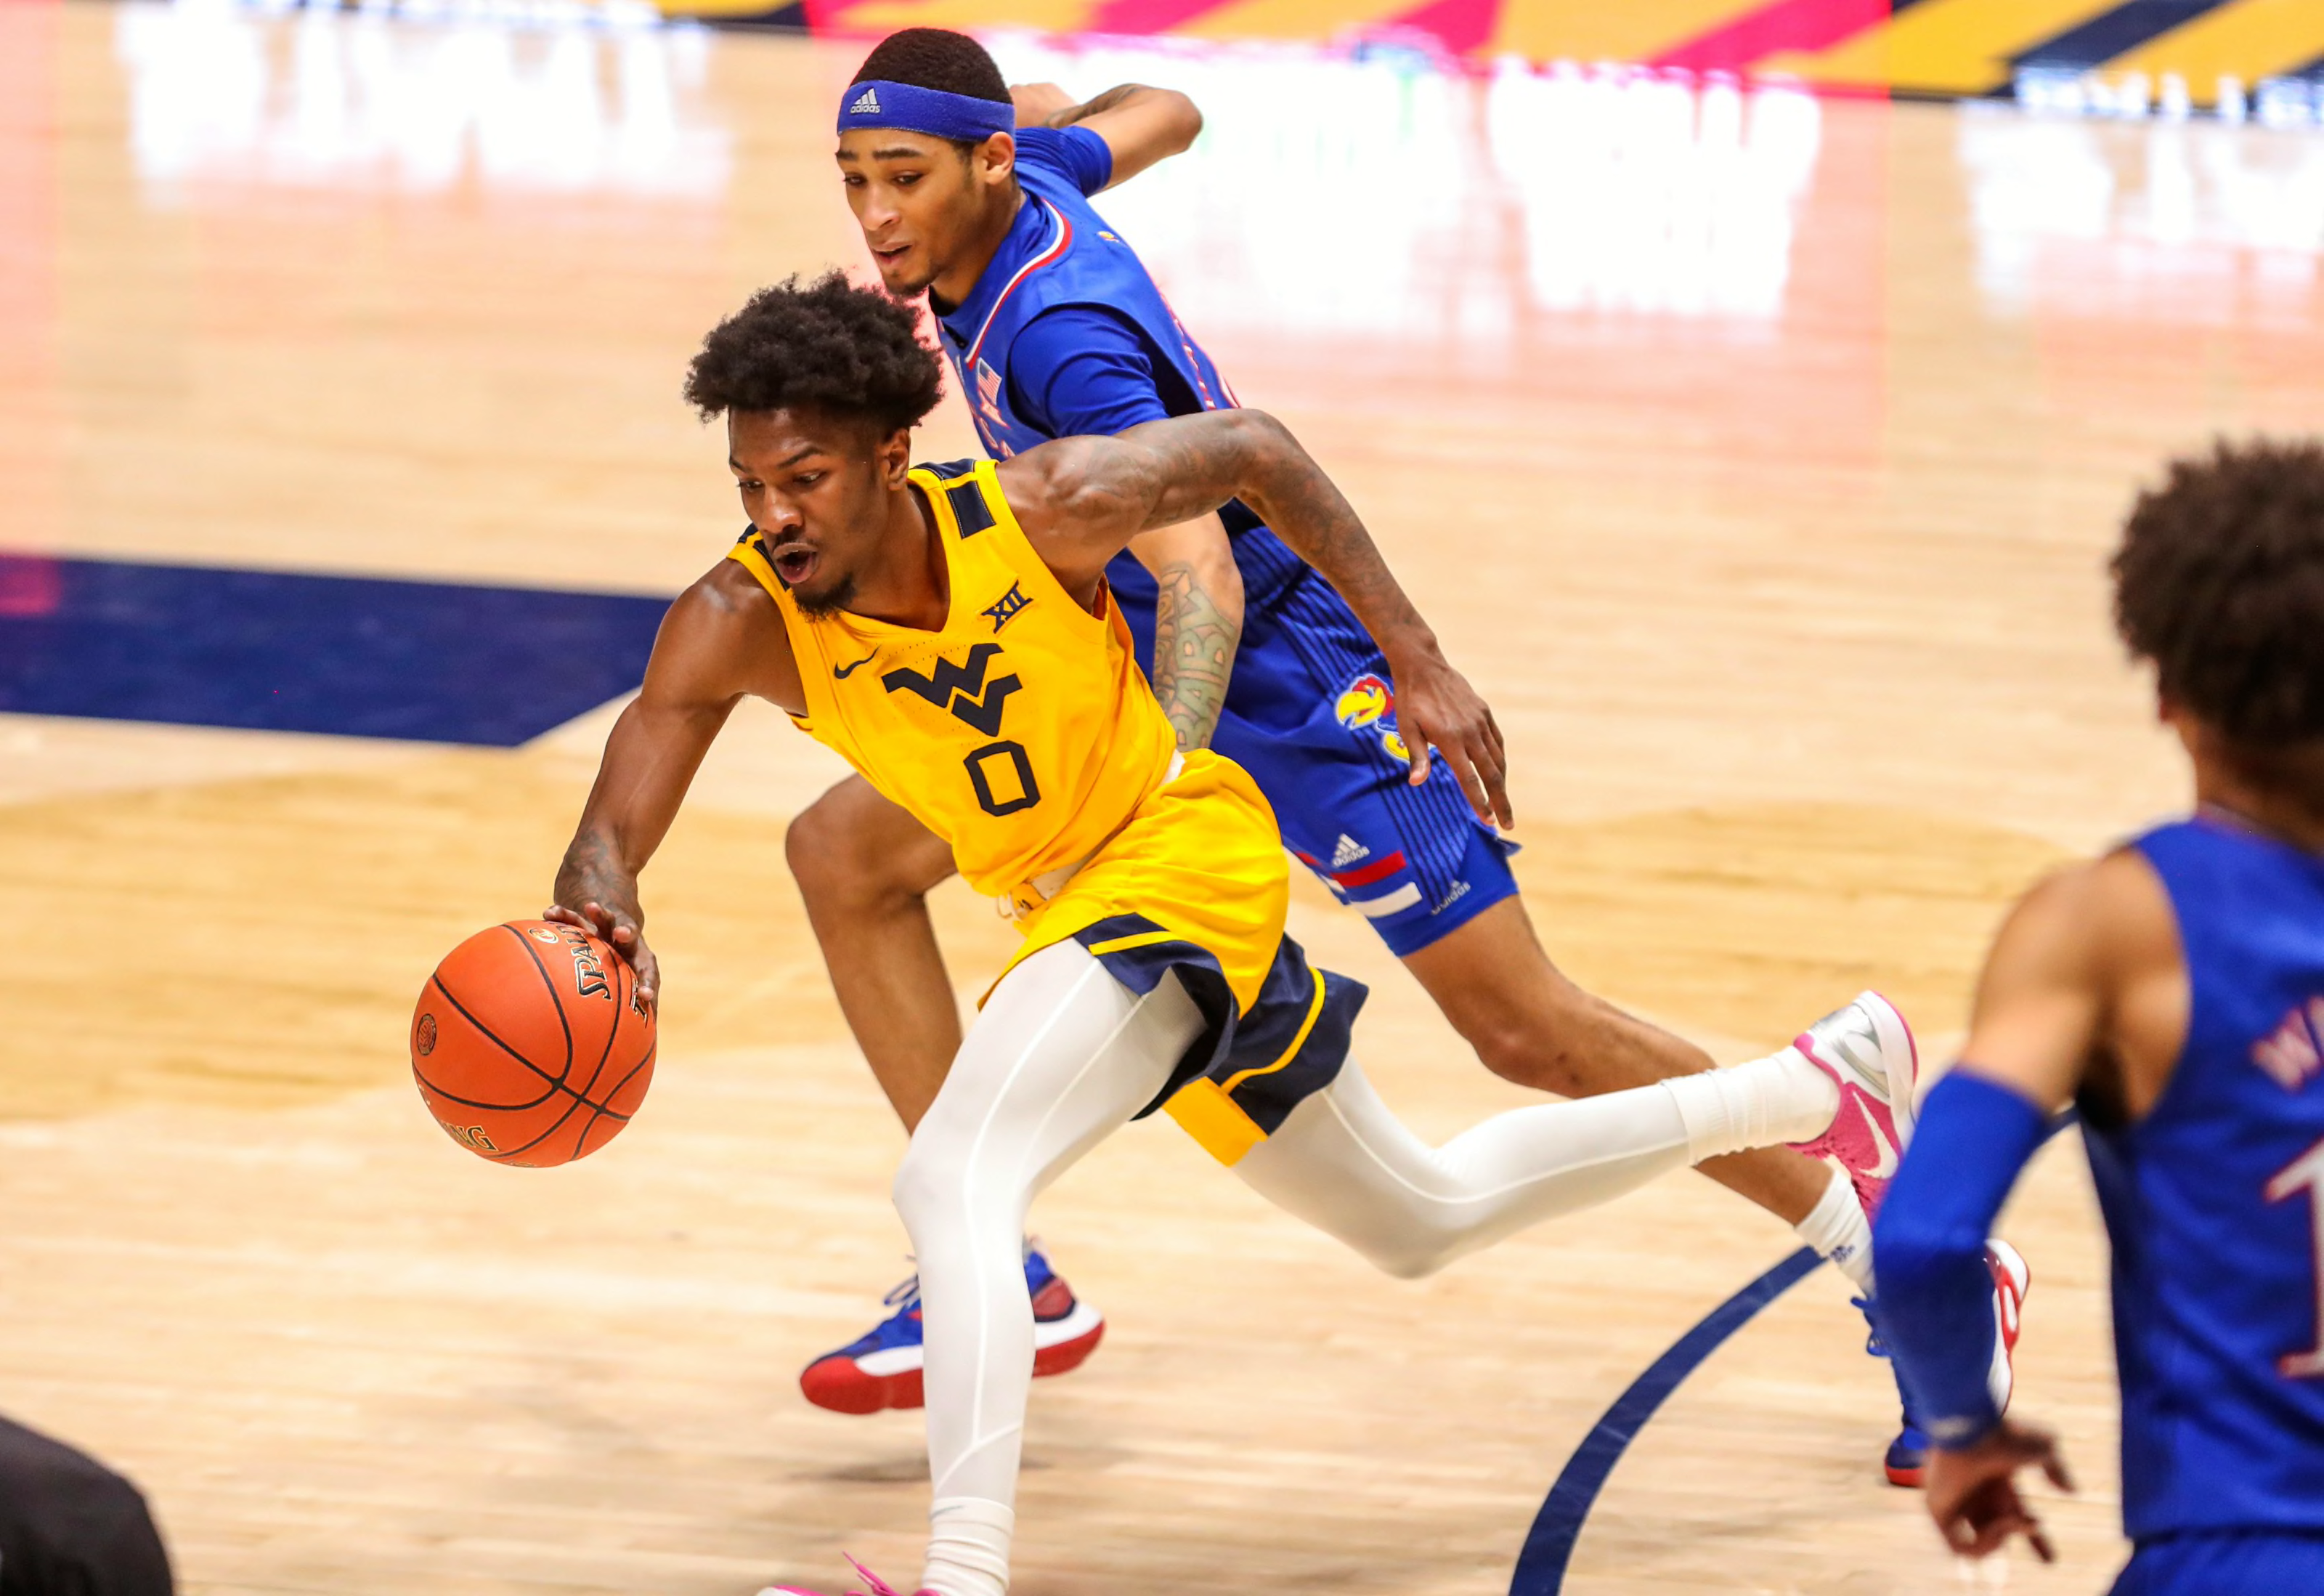 West Virginia Basketball 202223 season preview and outlook